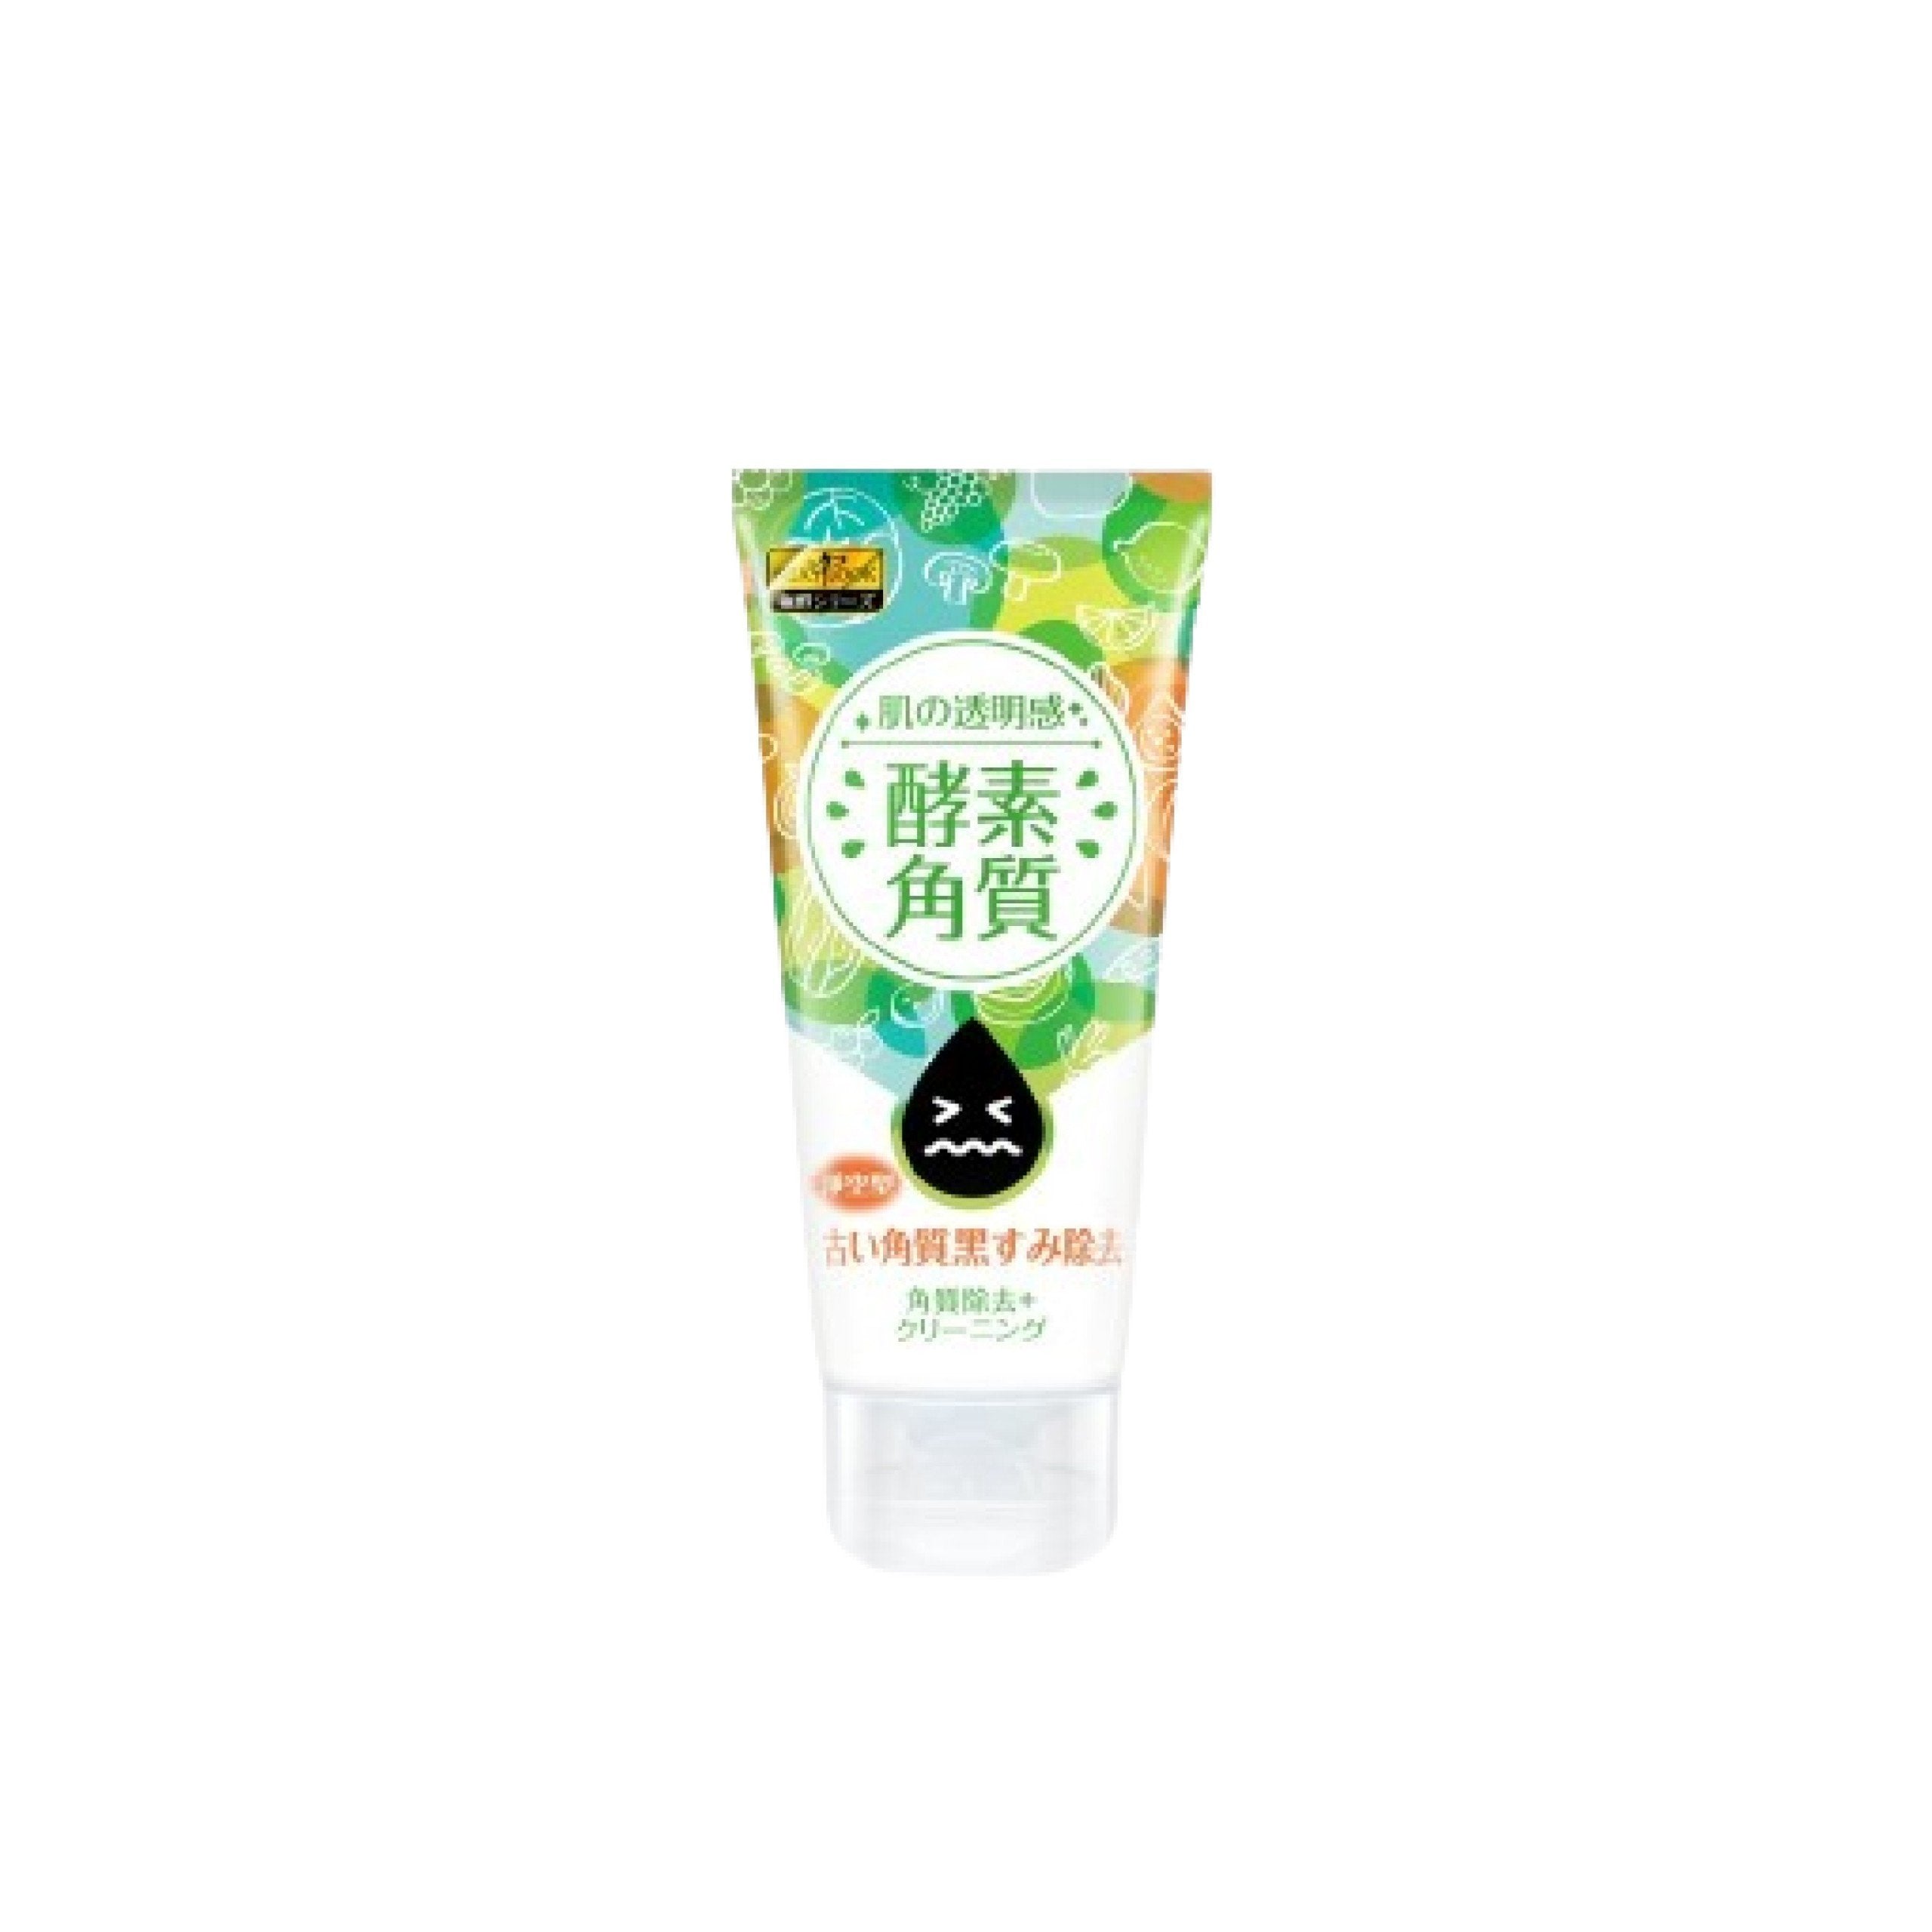 SEXYLOOK FERMENTED FRUIT ENZYME PHYSICAL EXfoliating Gel 120ml